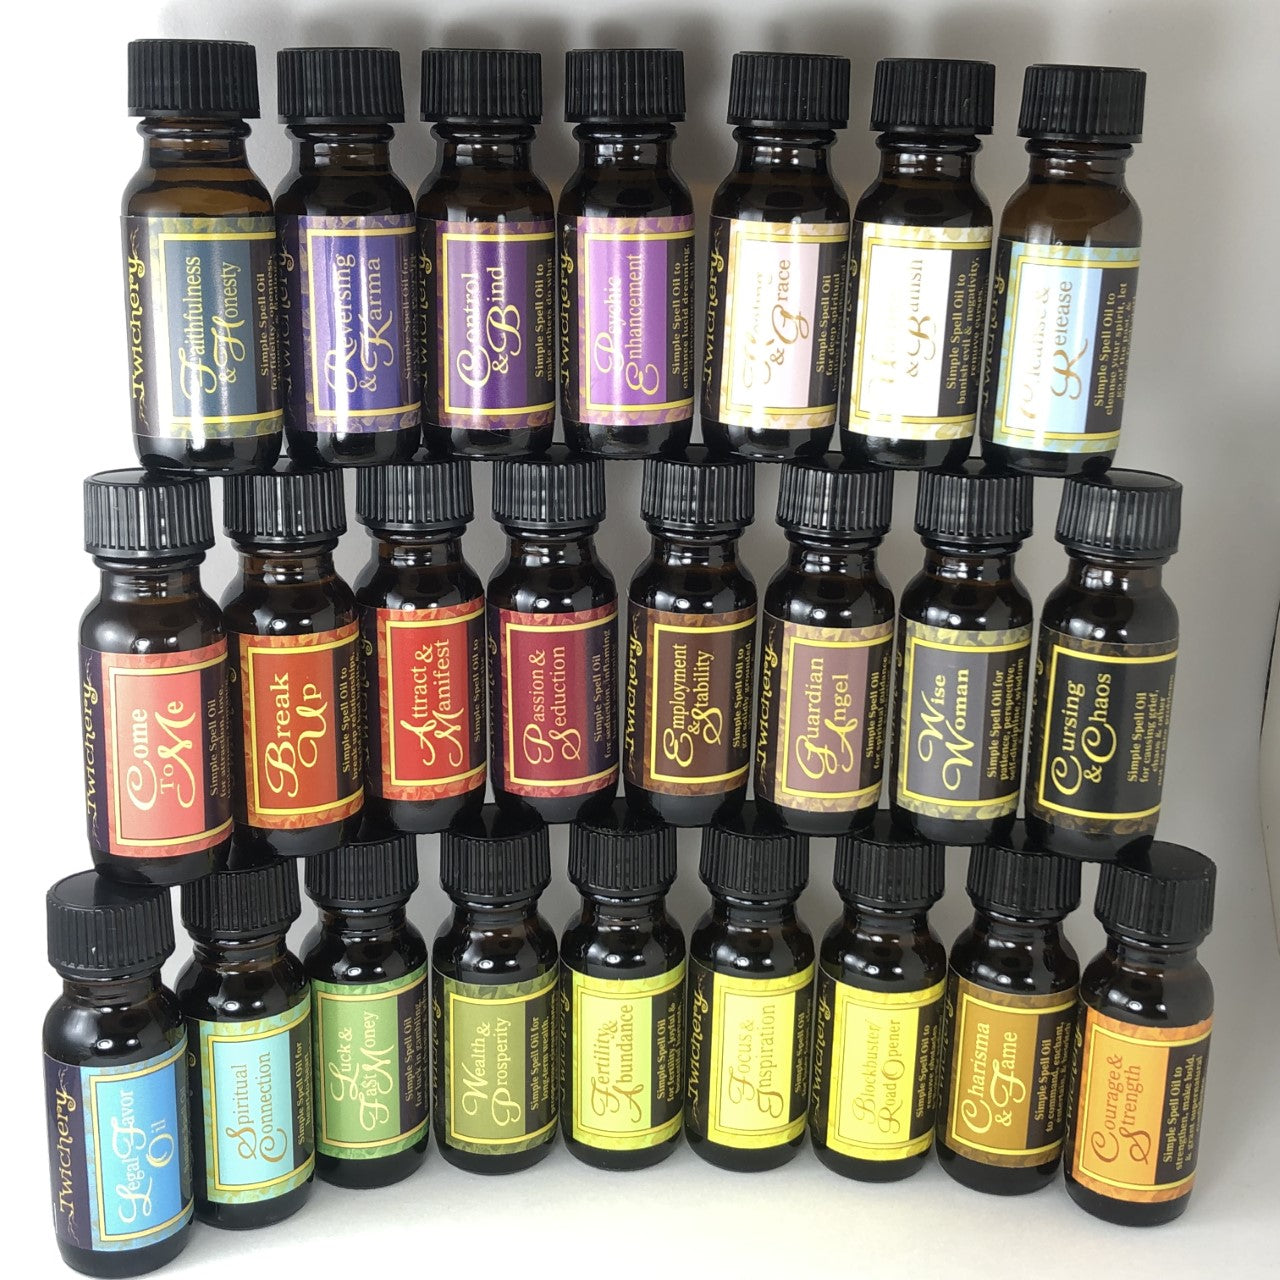 Twichery Quikspell Oils for establishing rapport with anyone.  Beautifully collectible! Wise Woman Oil pictured with all other Twichery Quikspell Oils! Hoodoo, Voodoo, Wicca, Pagan